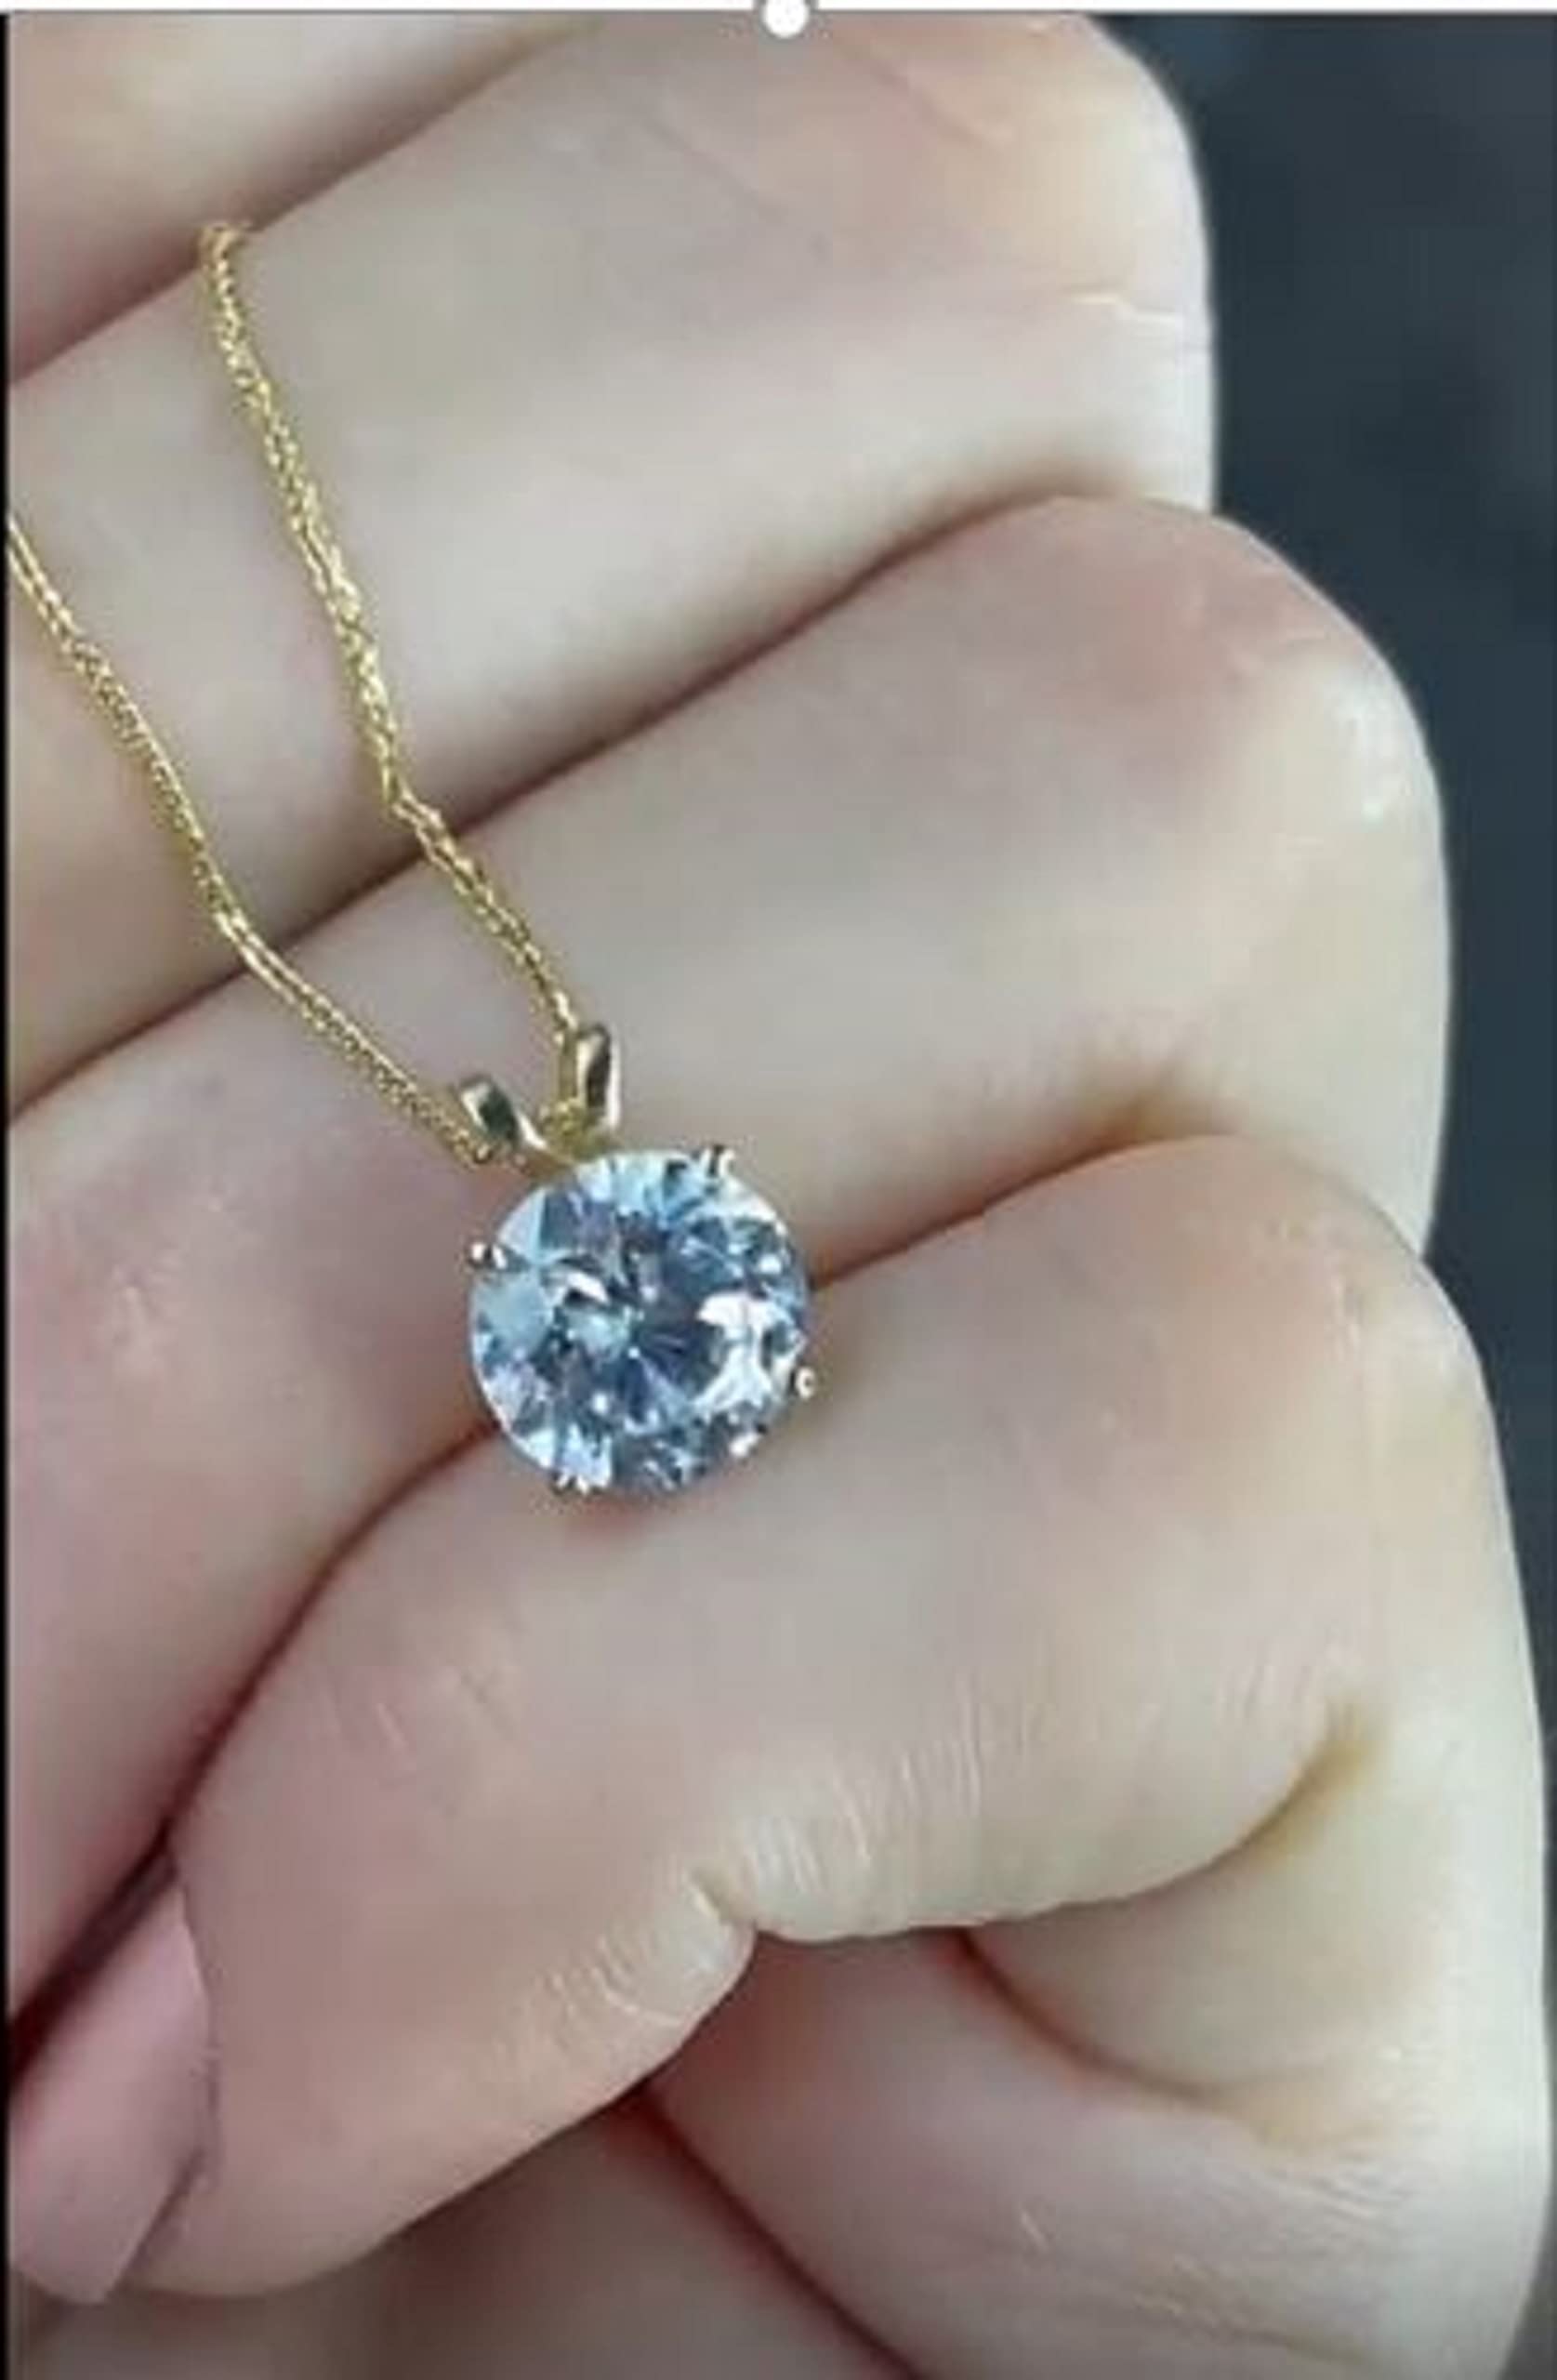 18k Luxury Necklaces for women 1.5ct Diamond Pendant Necklace 18kt SOLID GOLD jewelry for girlfrined Birthday HANDMADE Jewelry 8mm Solitaire Necklace Gold Christmas Present Bday gift for her 18inch